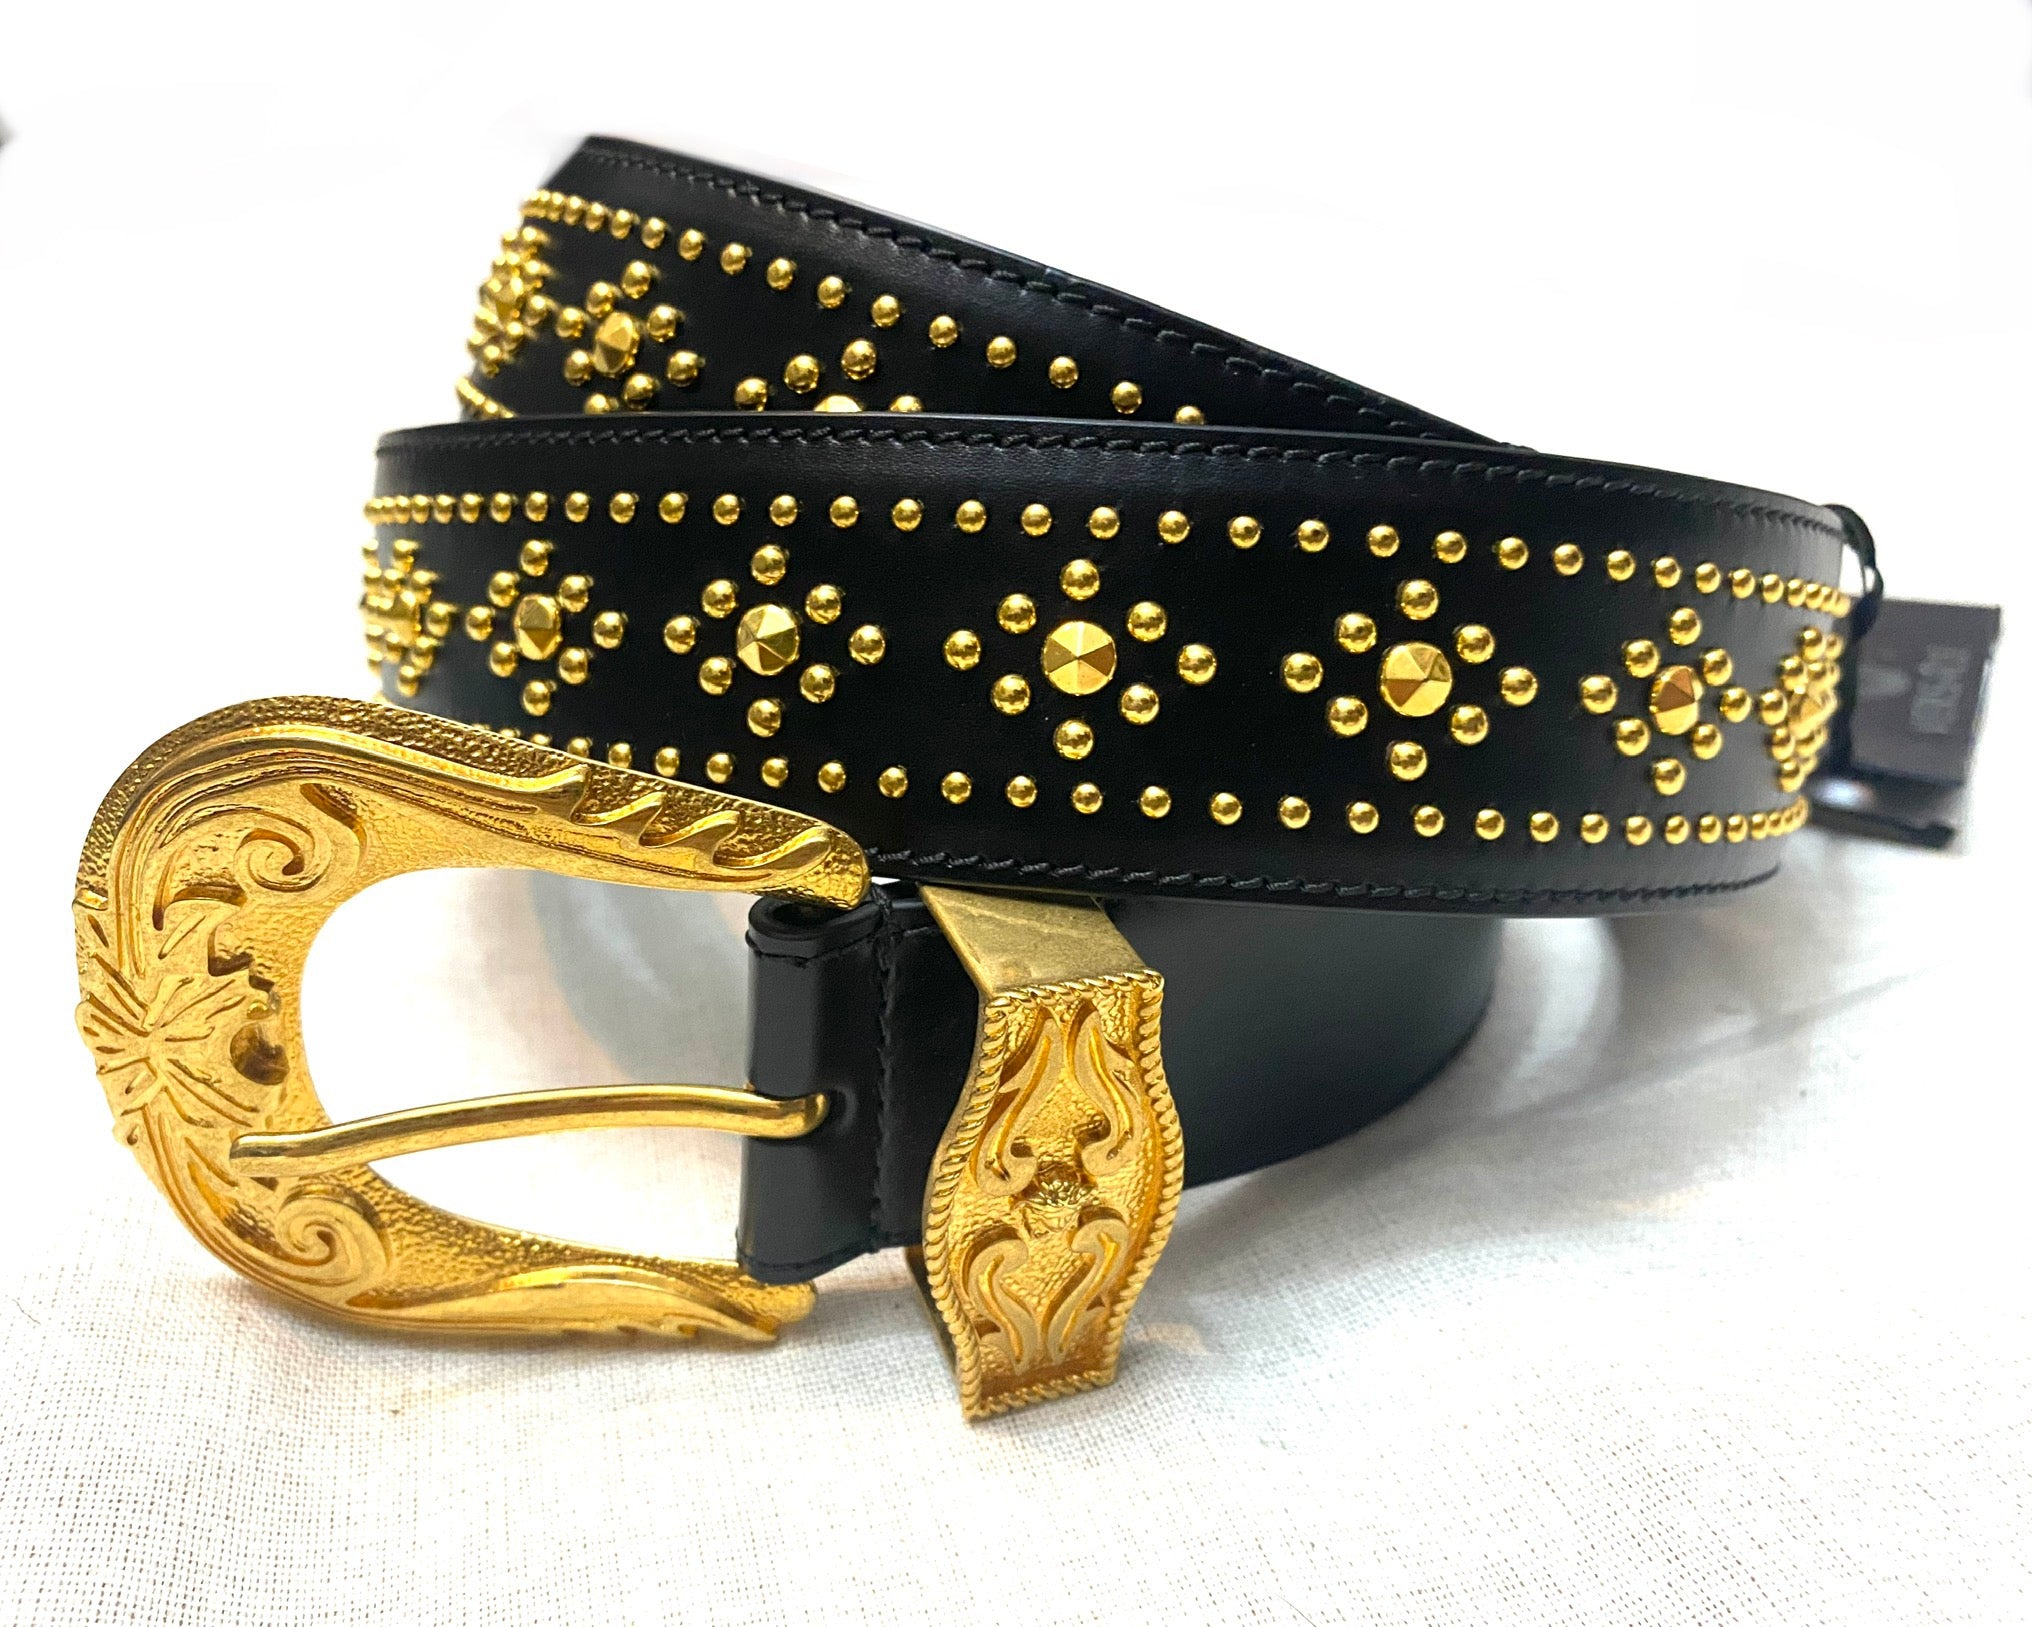 Versace Heritage western style black belt with golden buckle and studs, New